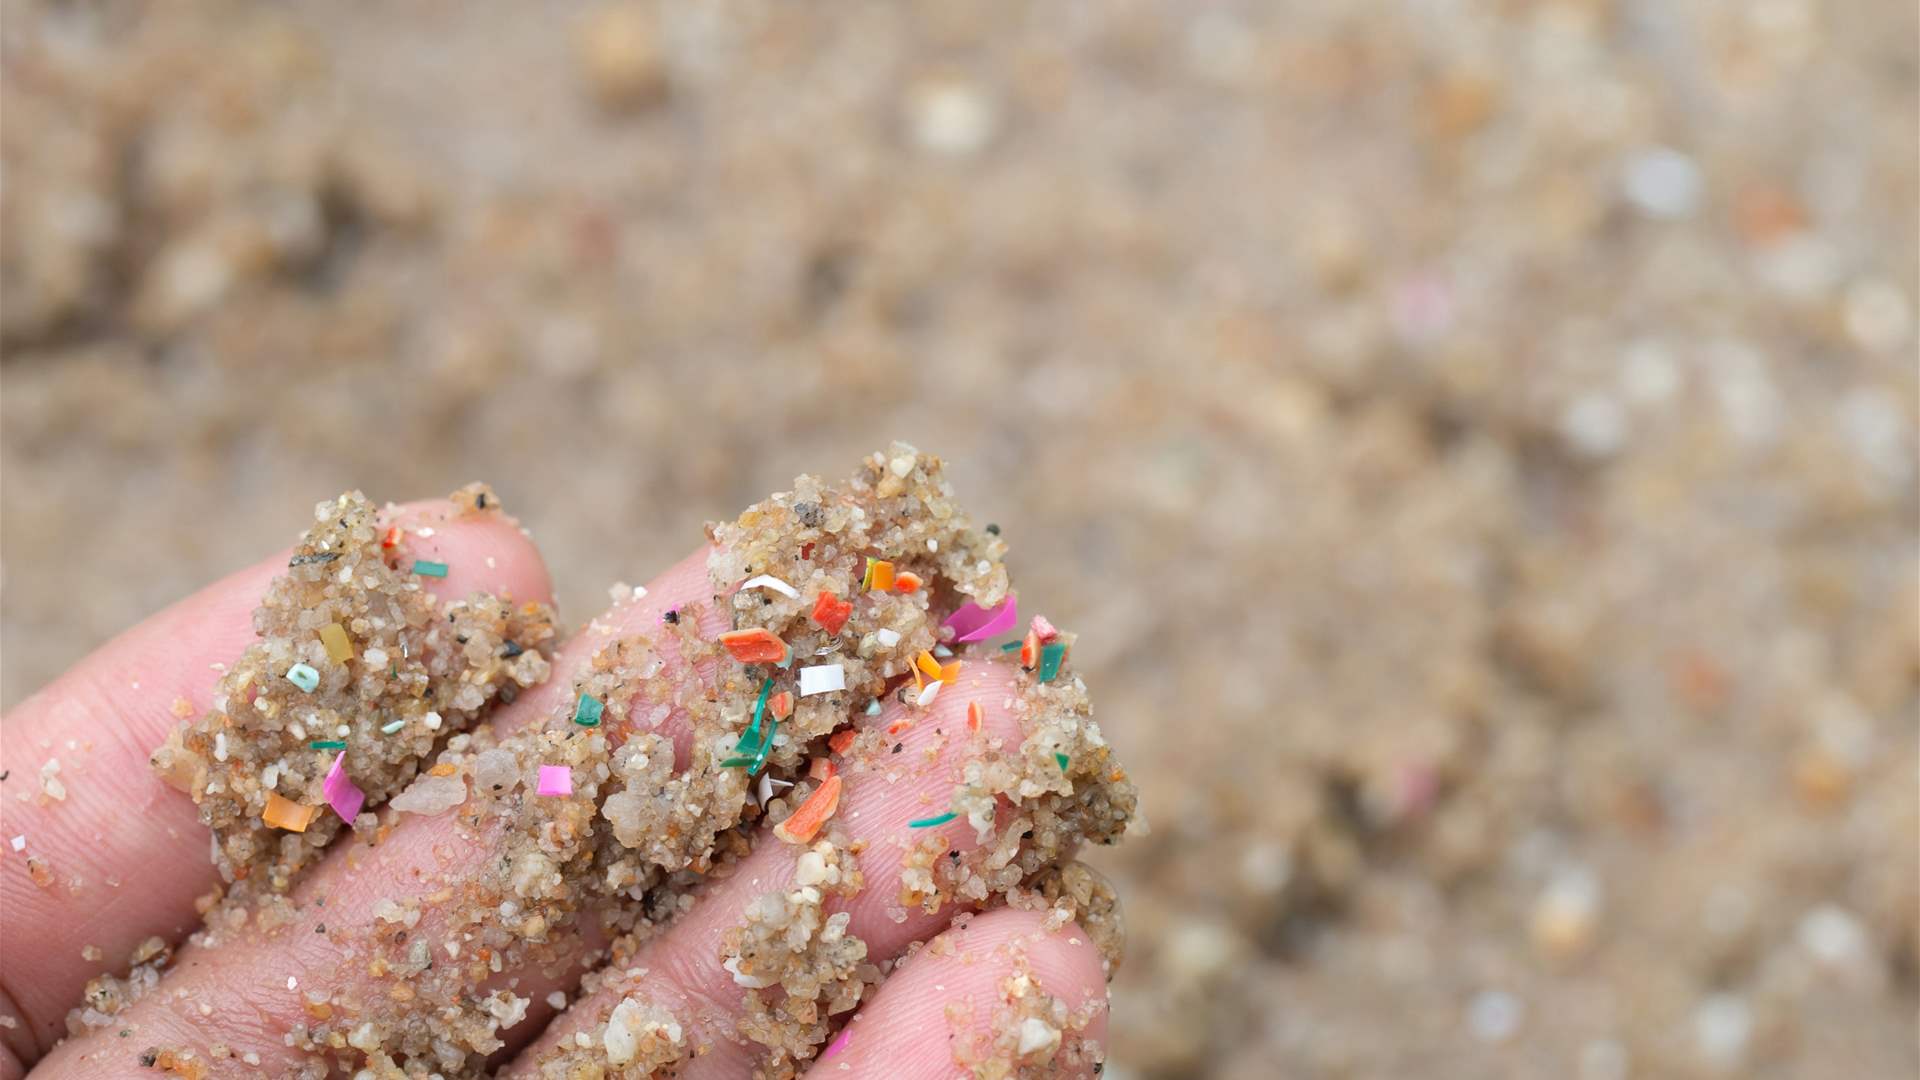 &#39;Time bomb’: Race to identify health effects of micro plastics